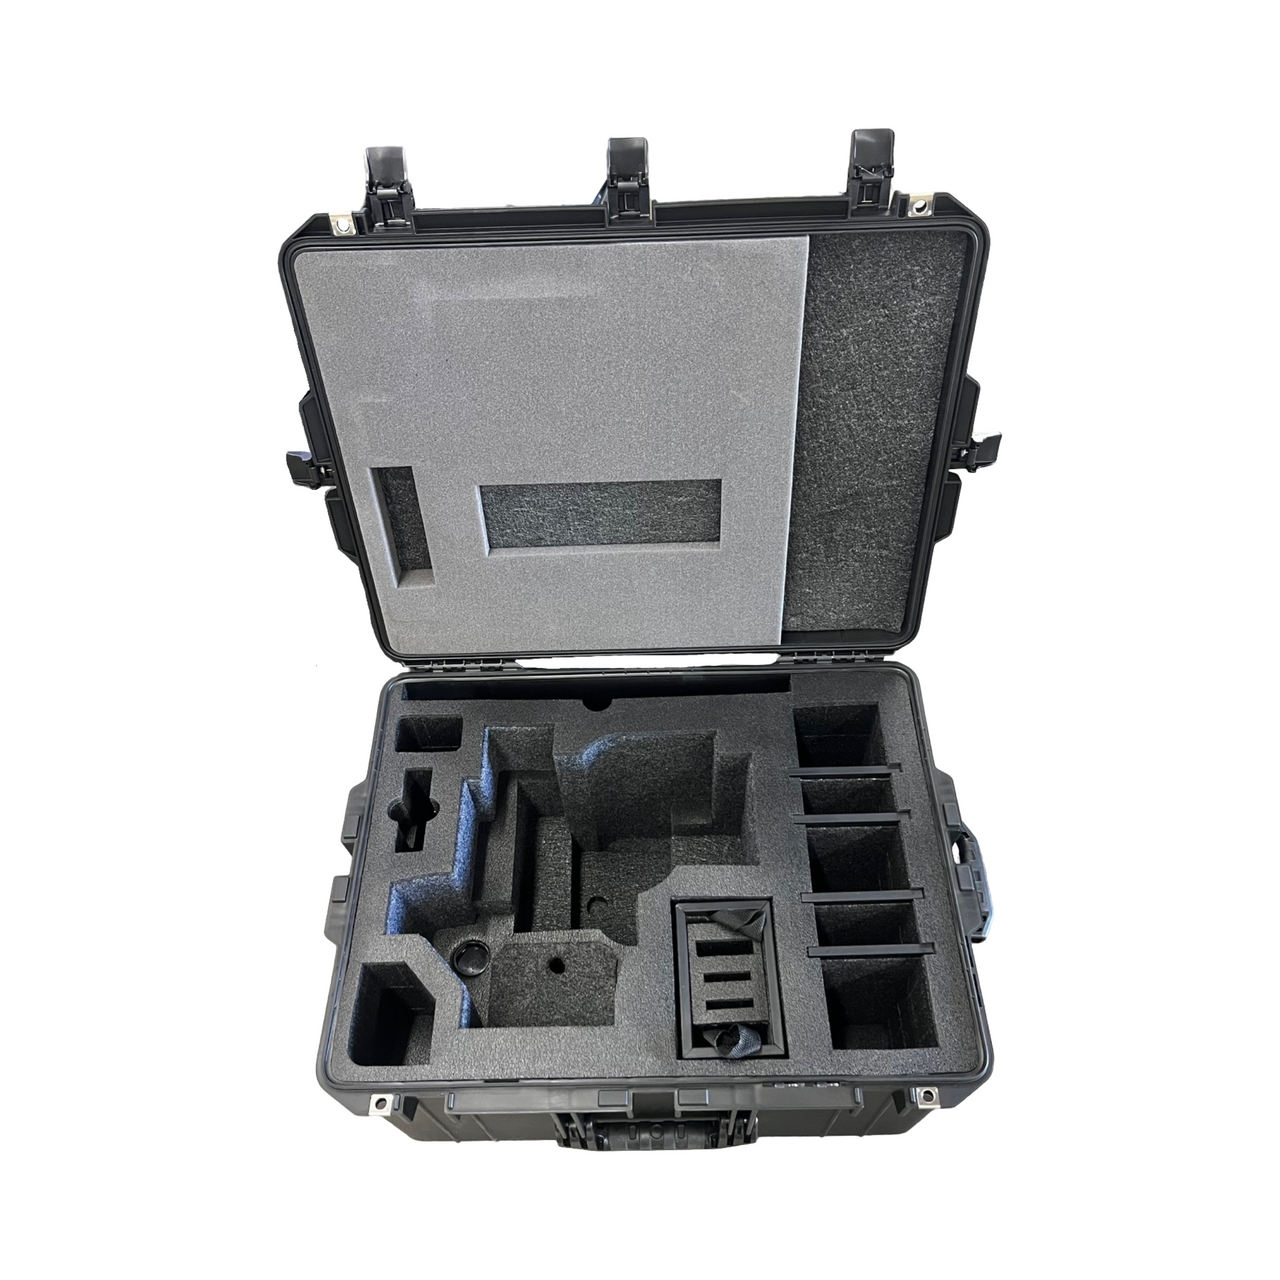 Sony BURANO Pelican case with various PCA